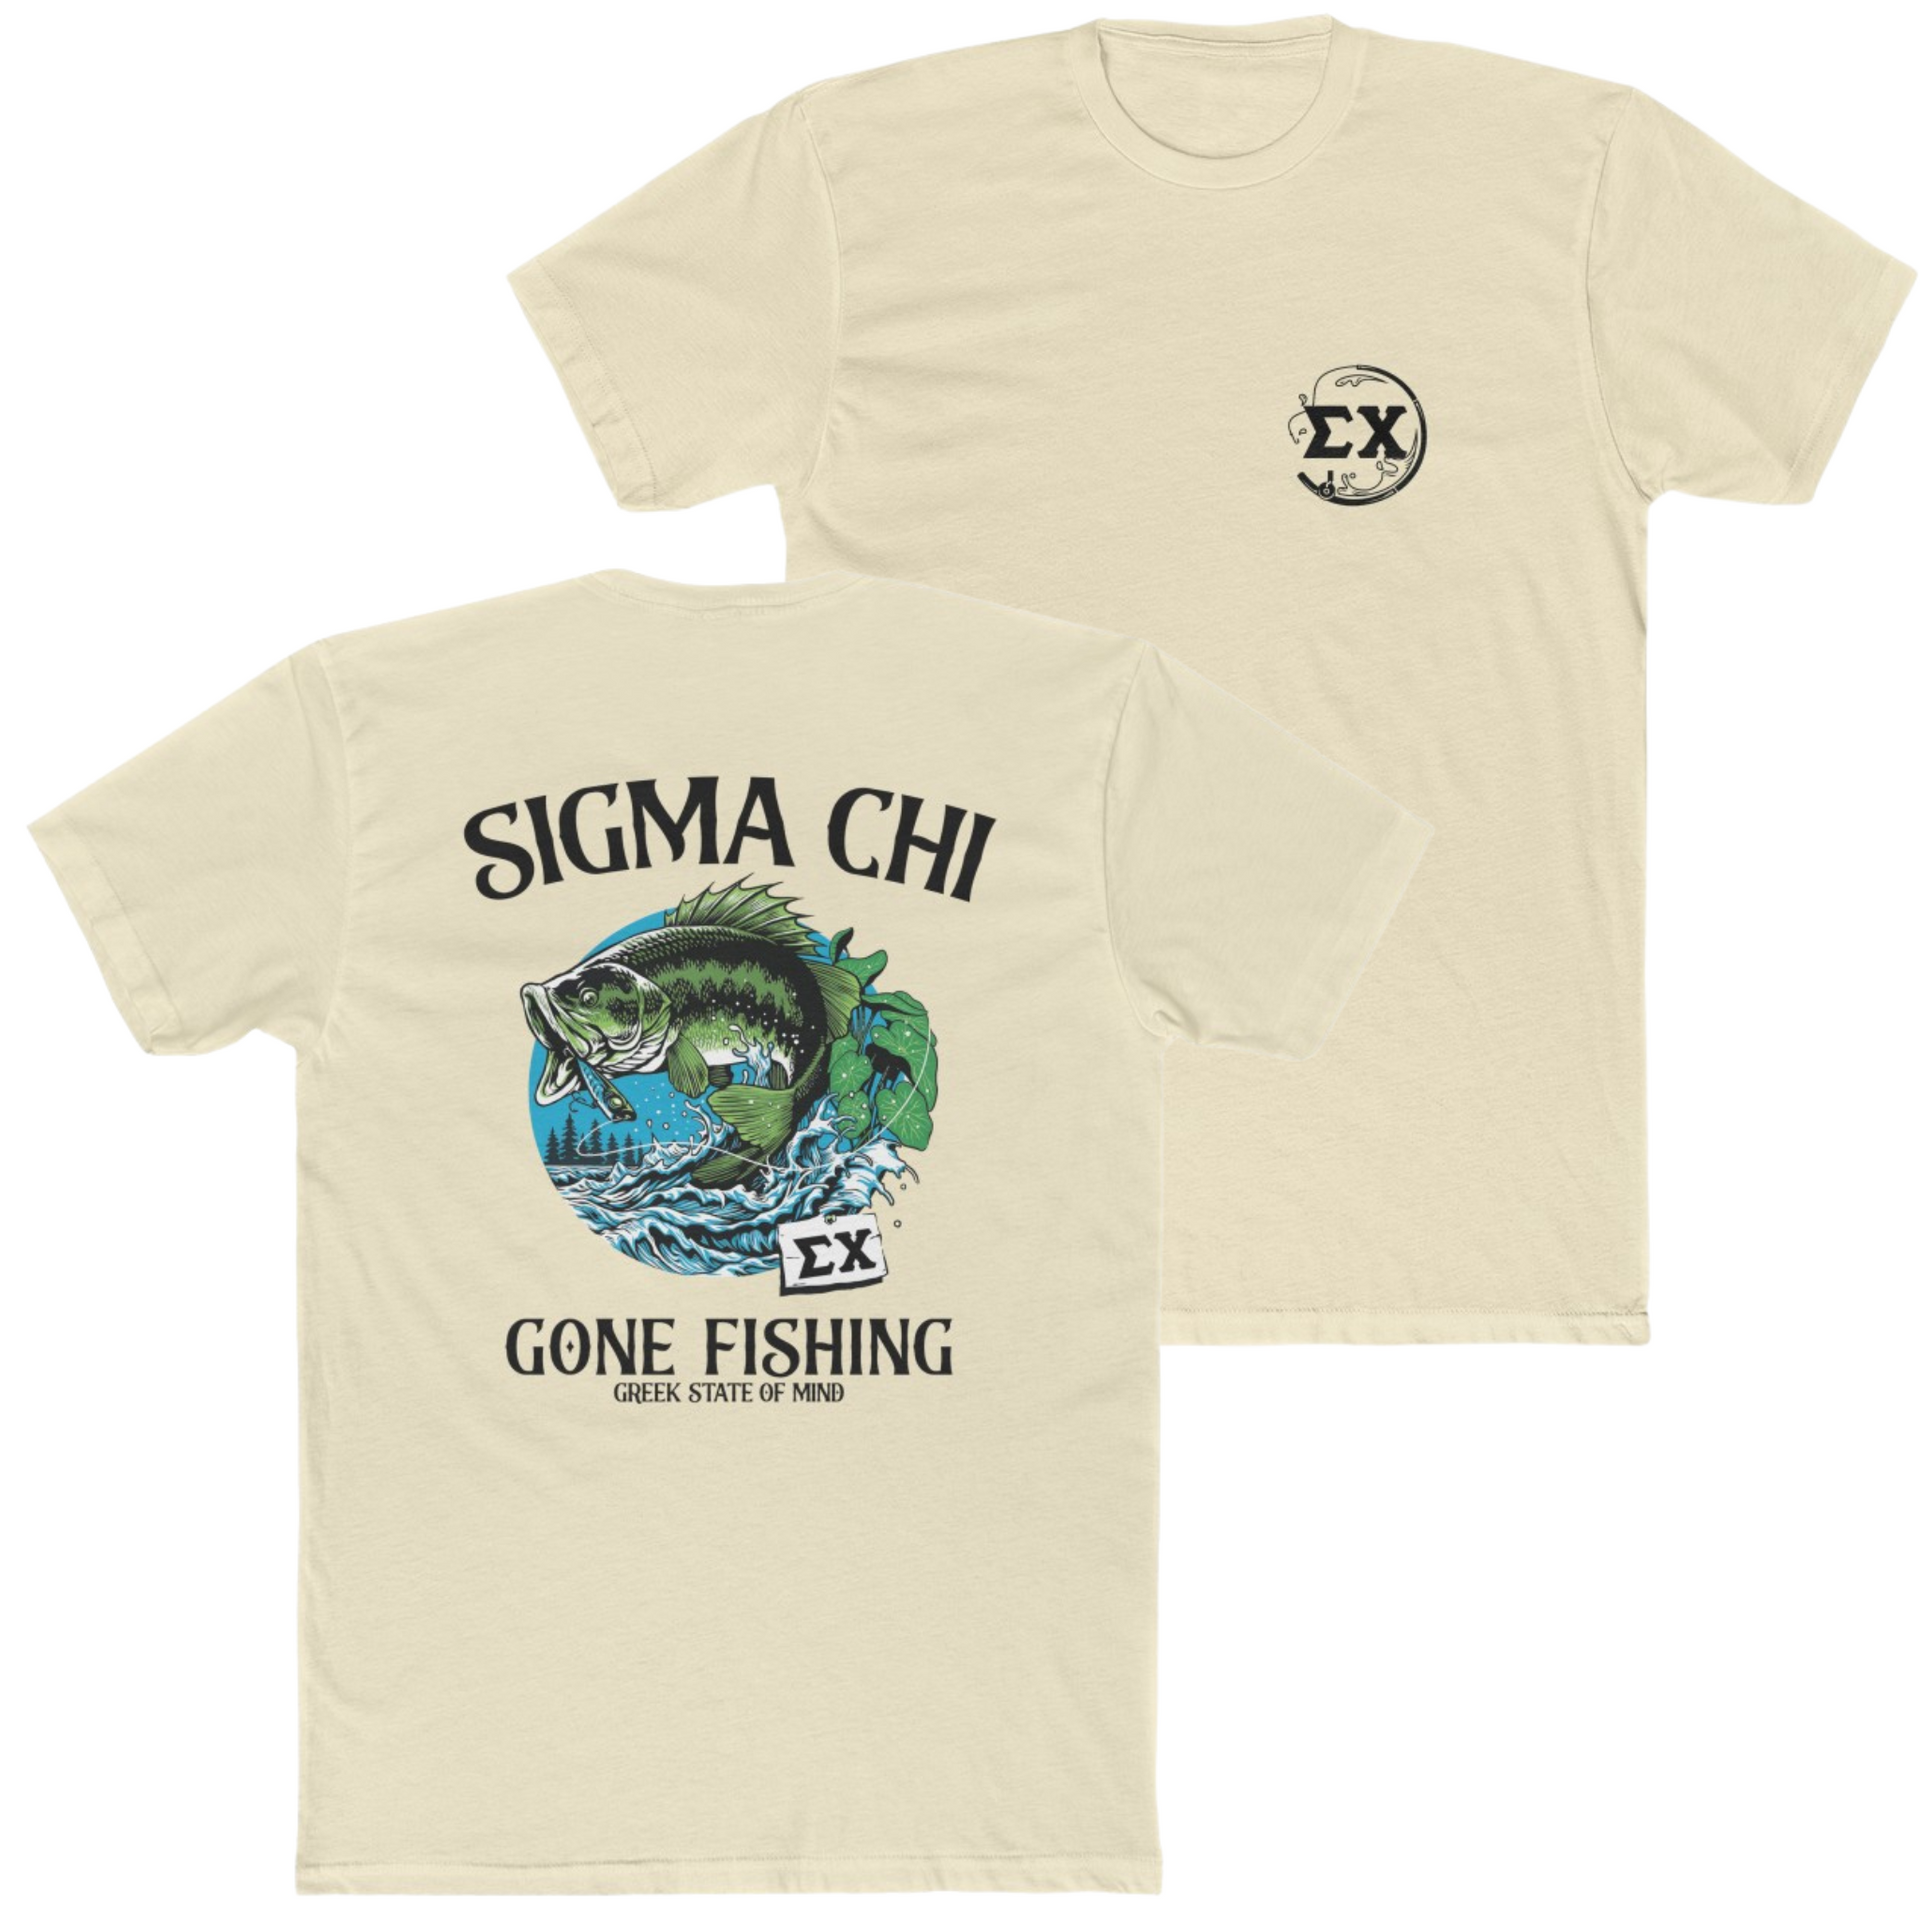 Sand Sigma Chi Graphic T-Shirt | Gone Fishing | Sigma Chi Fraternity Apparel